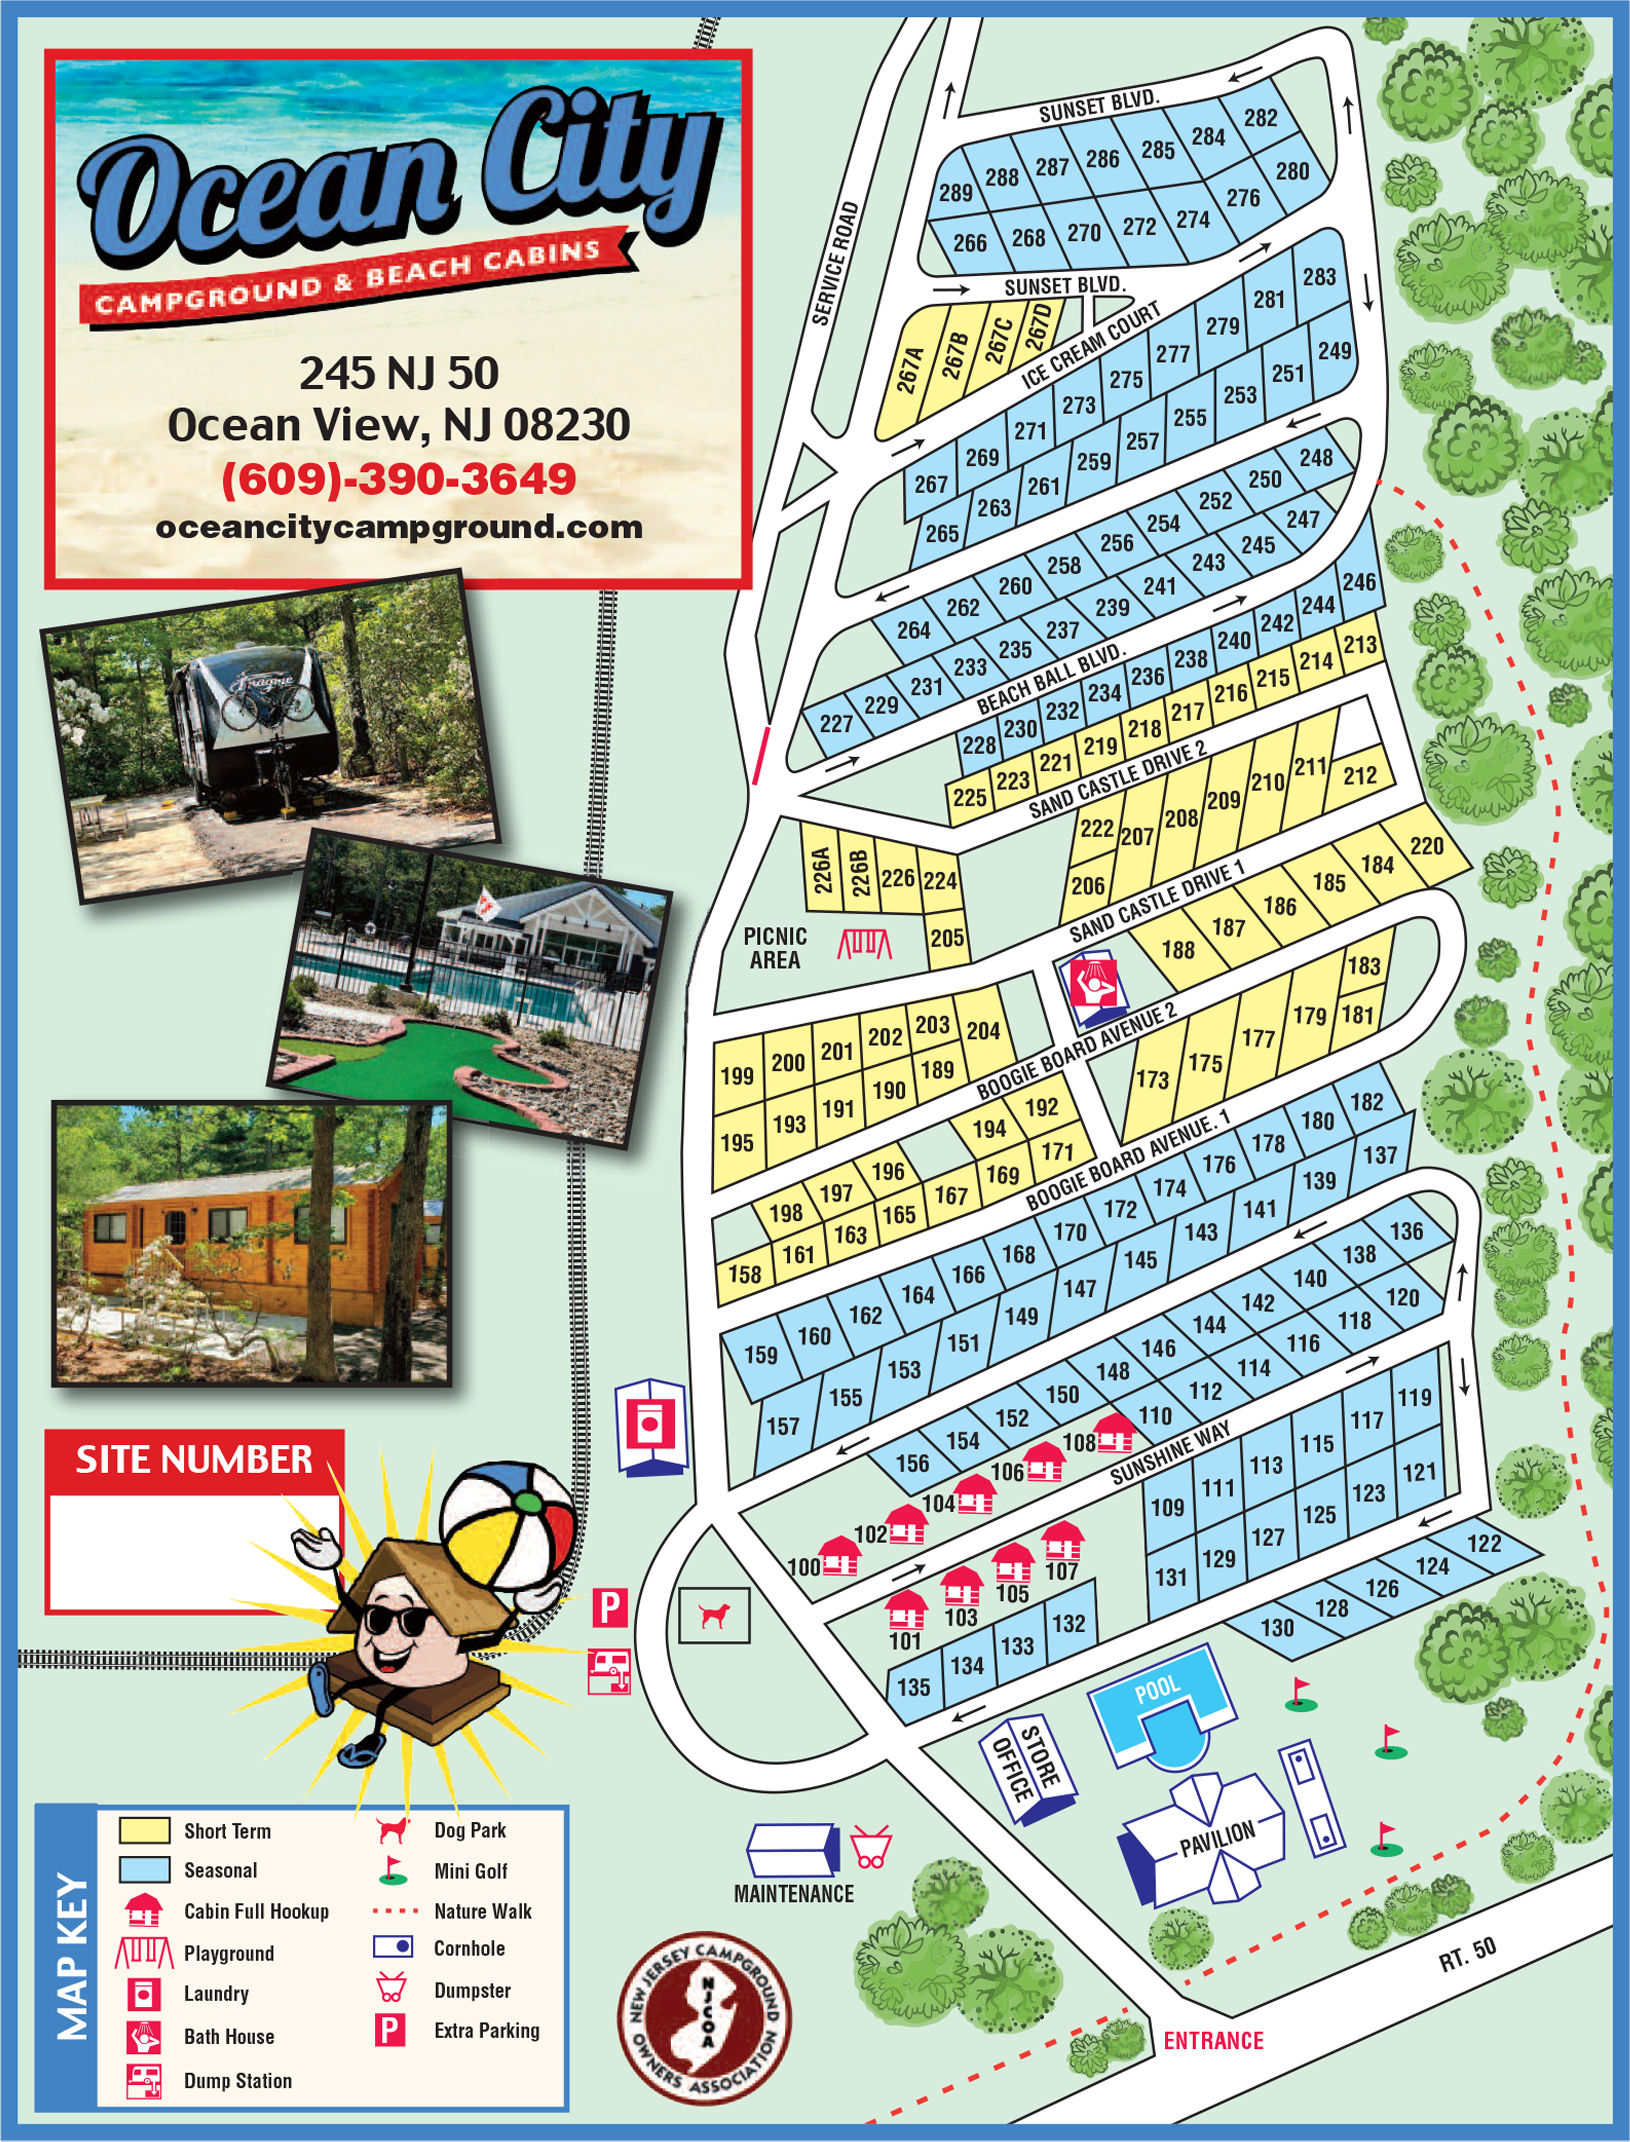 Ocean City Campground & Beach CAbins Map